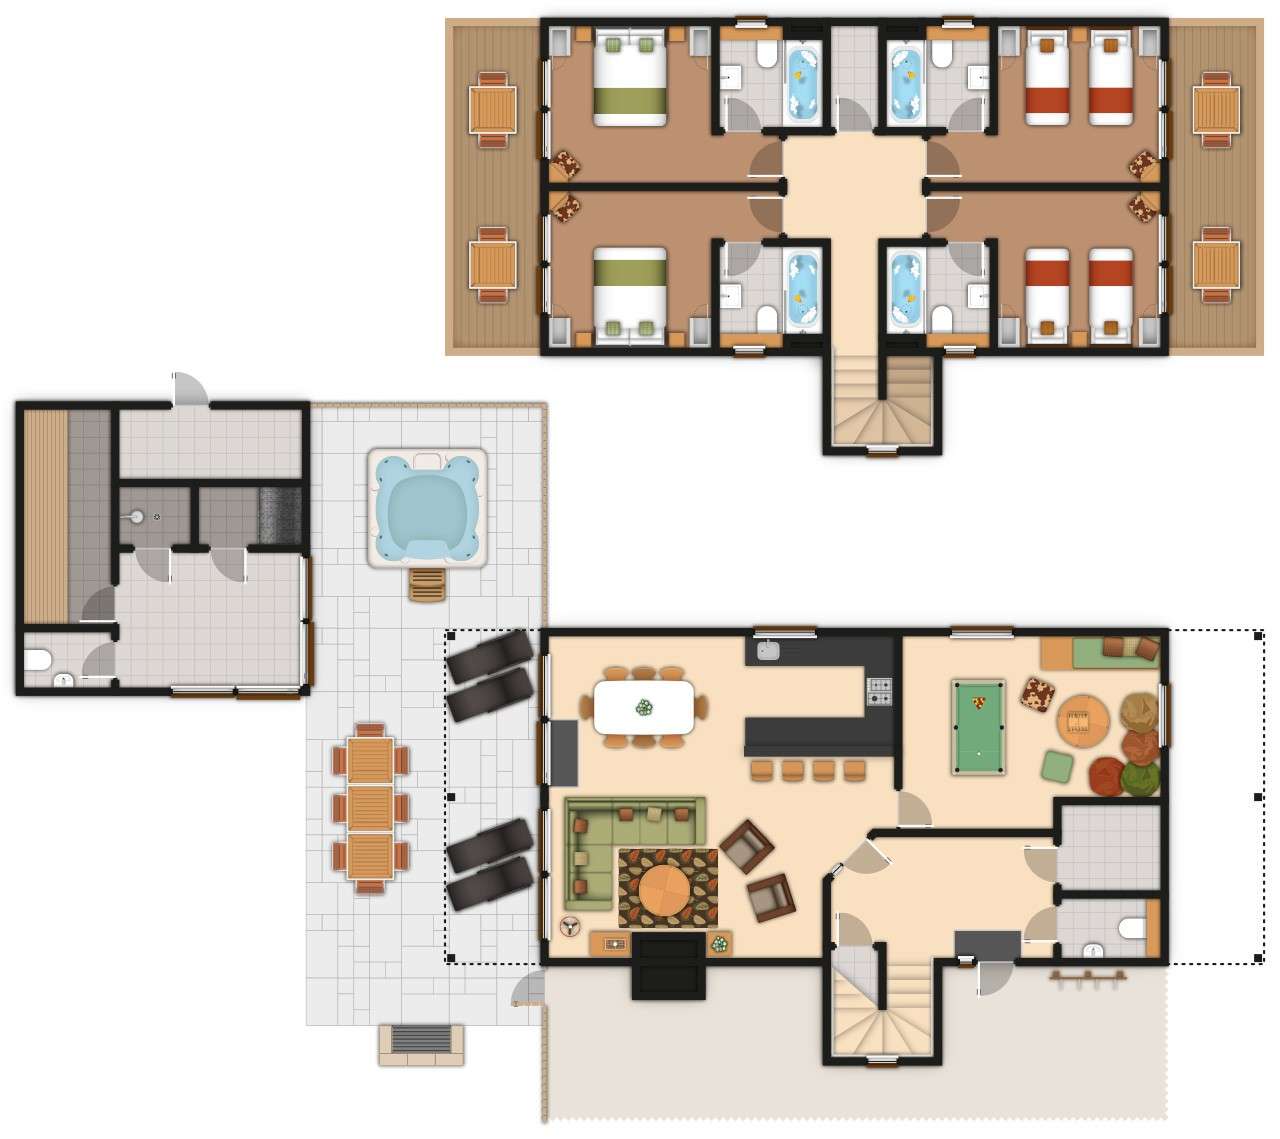 A detailed floor plan illustration of a 4 bedroom Exclusive Lodge. If you require further assistance viewing the floor plan or need further information please contact Guest Services.